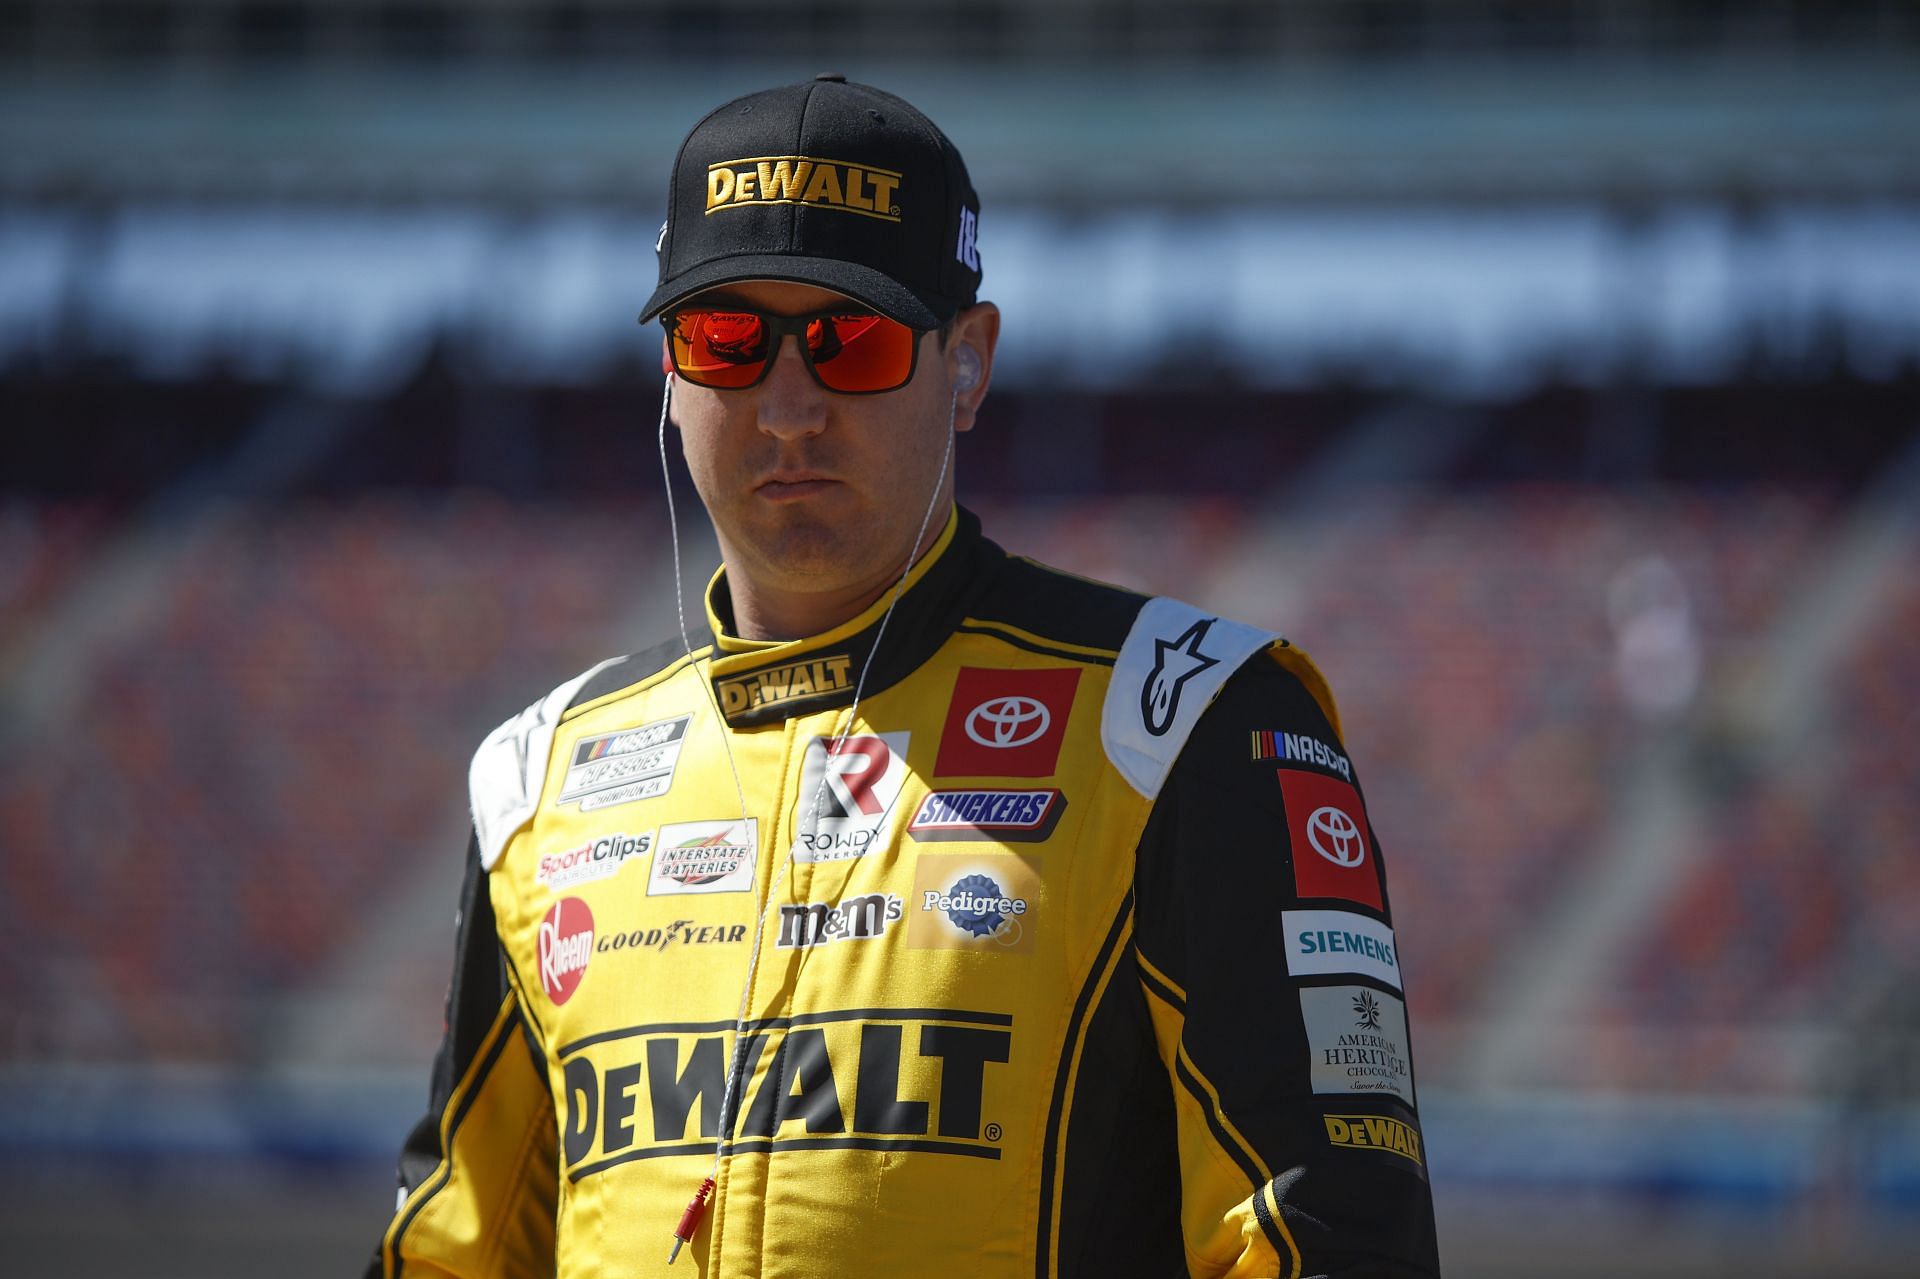 Kyle Busch waits on the grid during practice for the Ruoff Mortgage 500 at Phoenix Raceway (Photo by Sean Gardner/Getty Images)